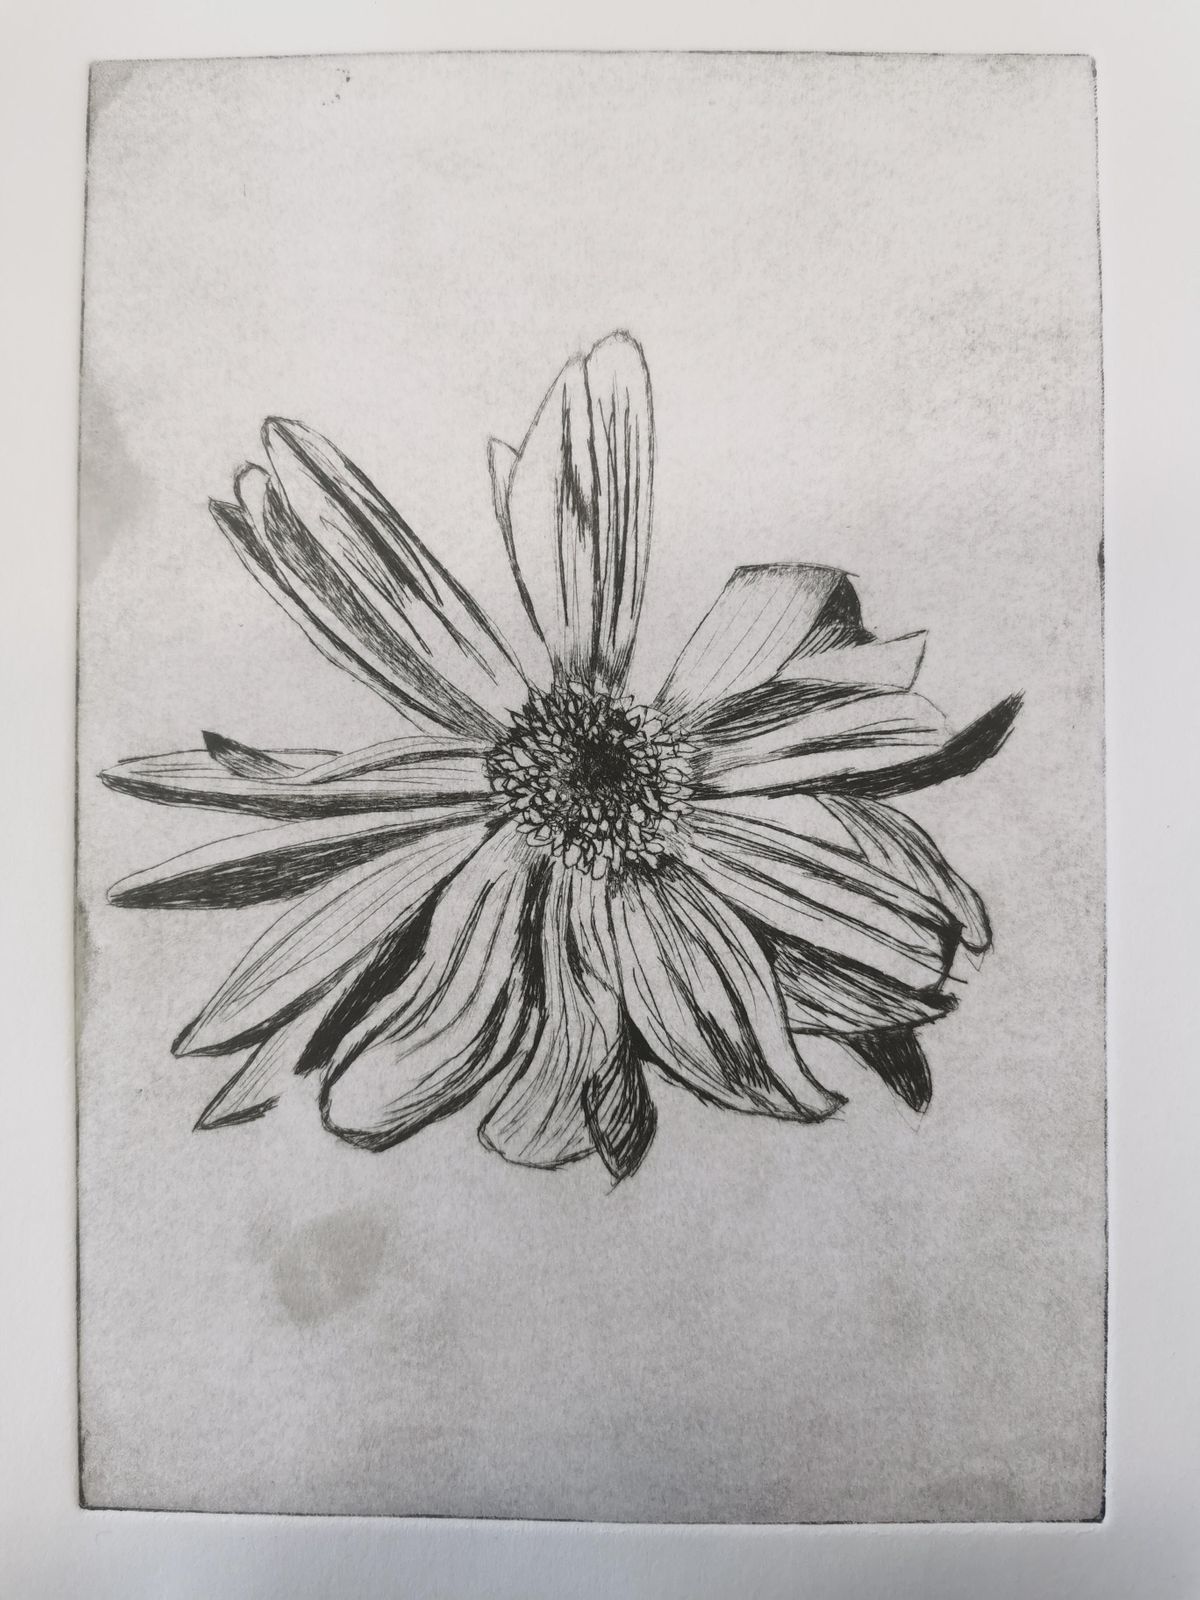 Full Day Drypoint with chine coll\u00e9 workshop AWOL studios, Hope Mill